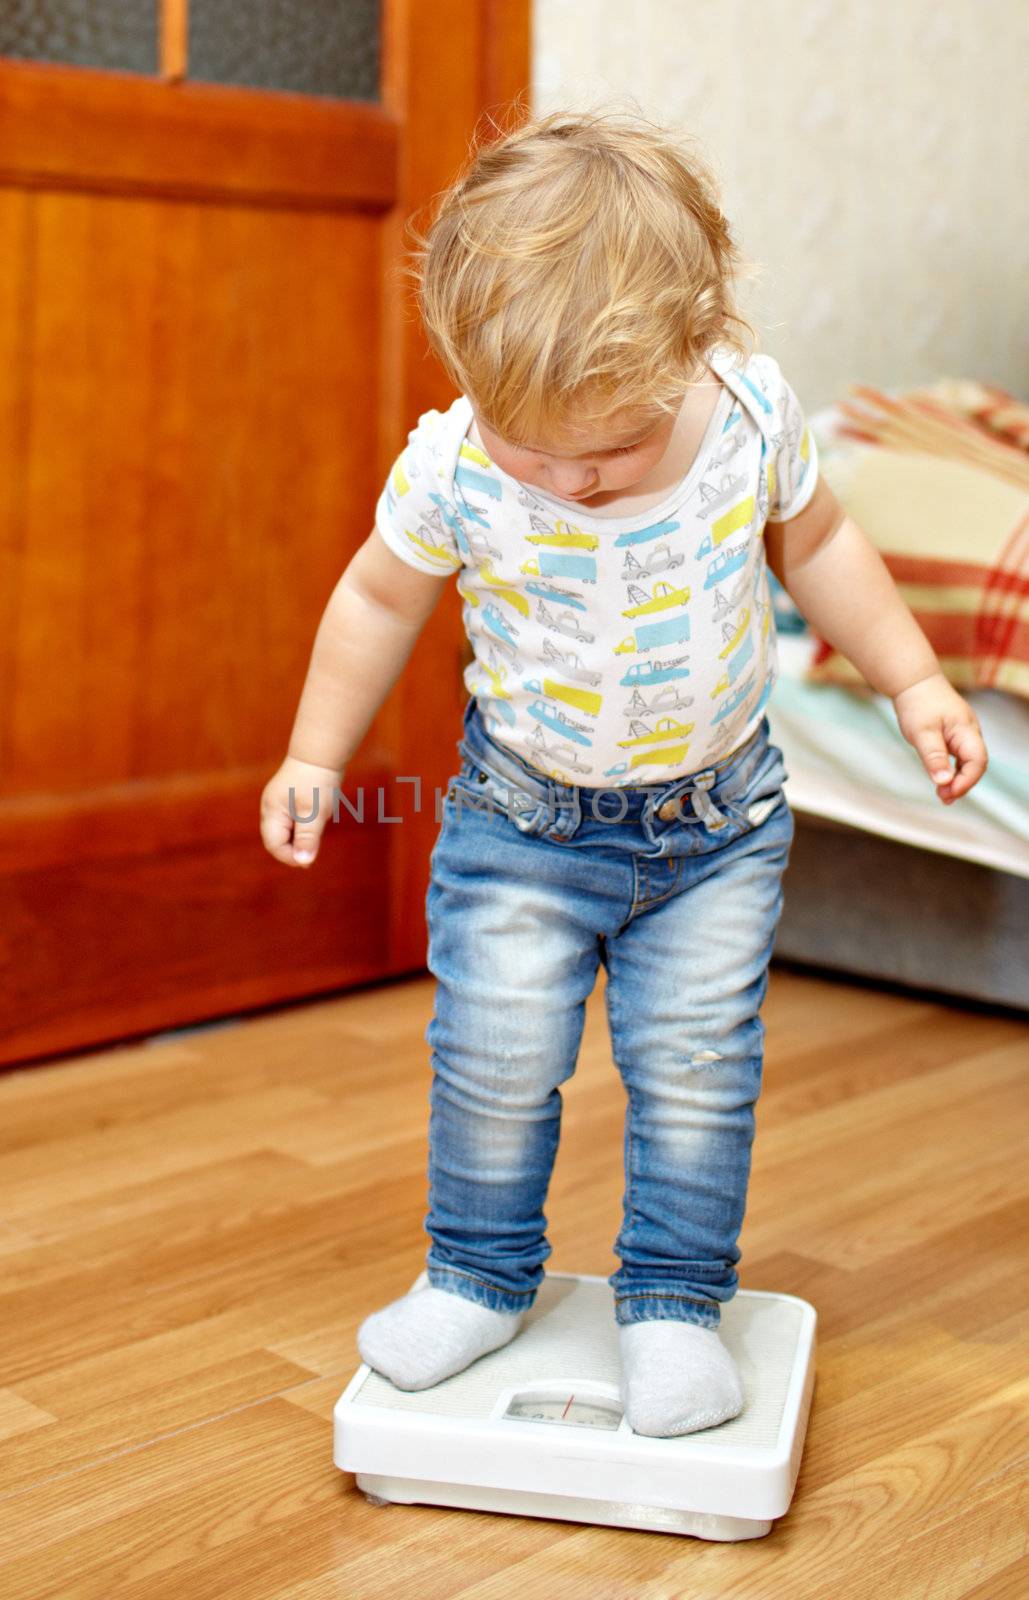 Little boy is standing on the scales checking his weight.